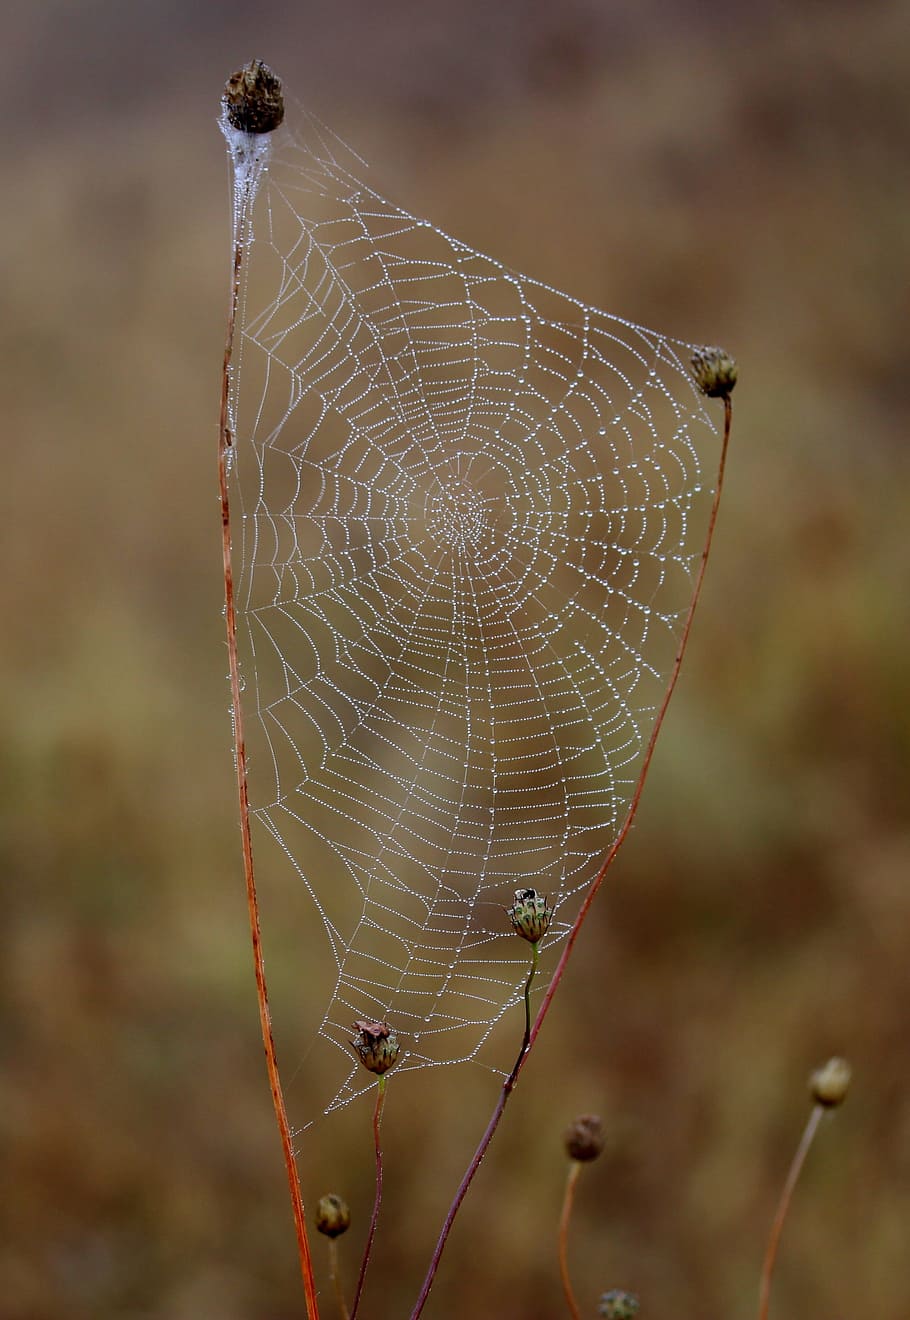 spider web, wet, hooked, place, dew, drops, nature, fragility, focus on foreground, close-up